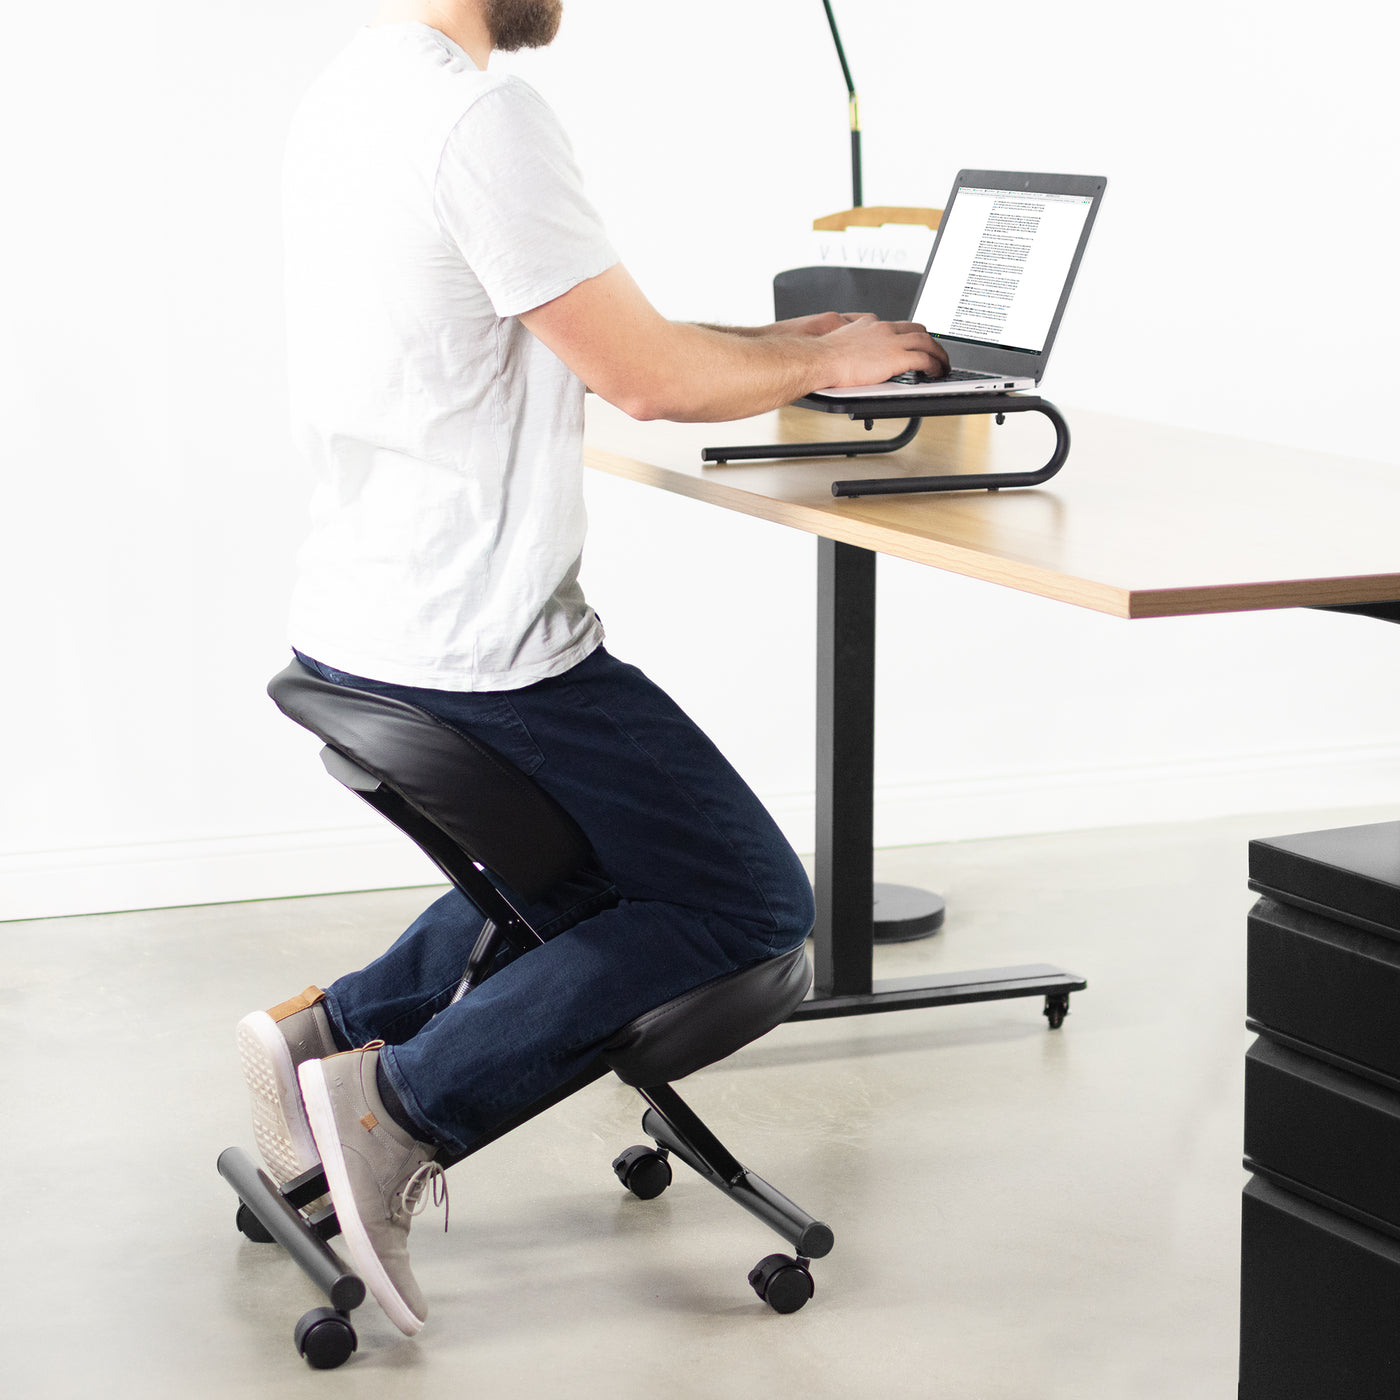 Maximize comfort working at your office desk with a padded kneeling chair.